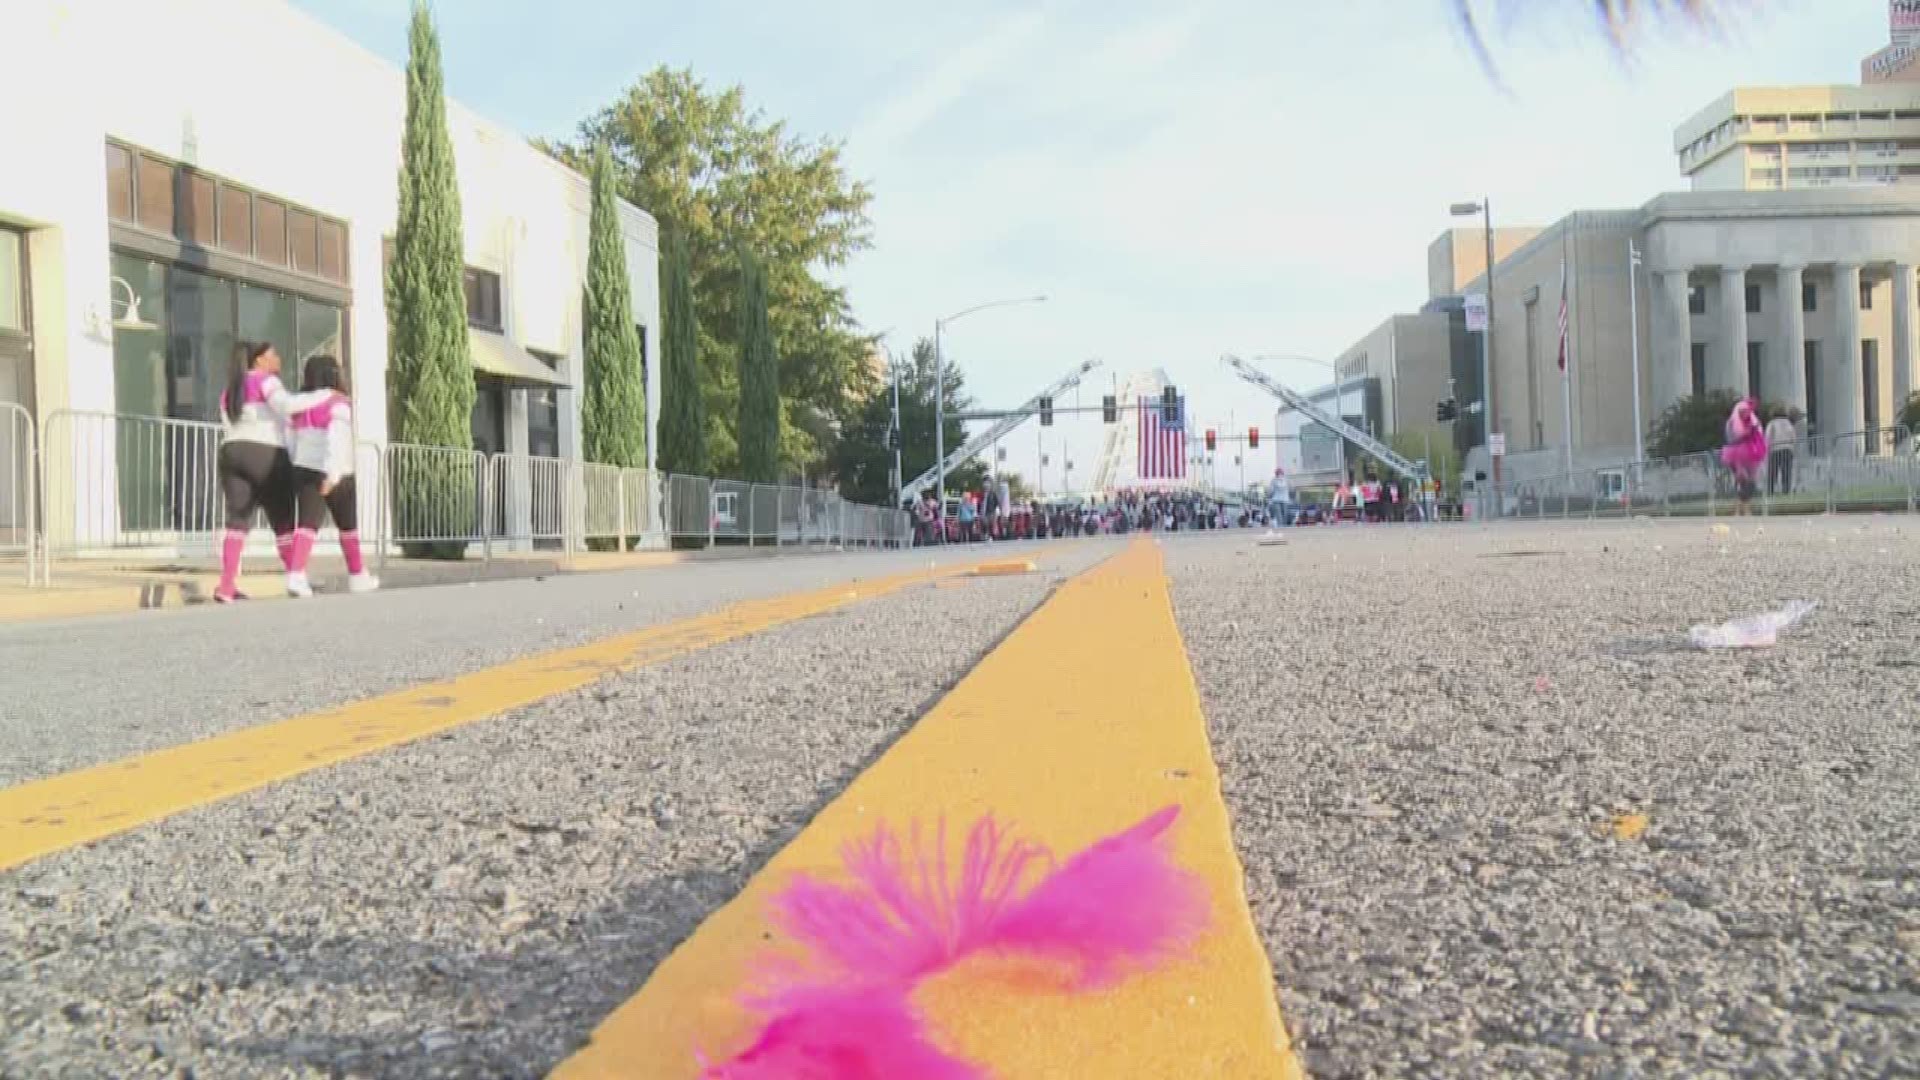 Thousands of people raced for the cure in Downtown Little Rock this morning.